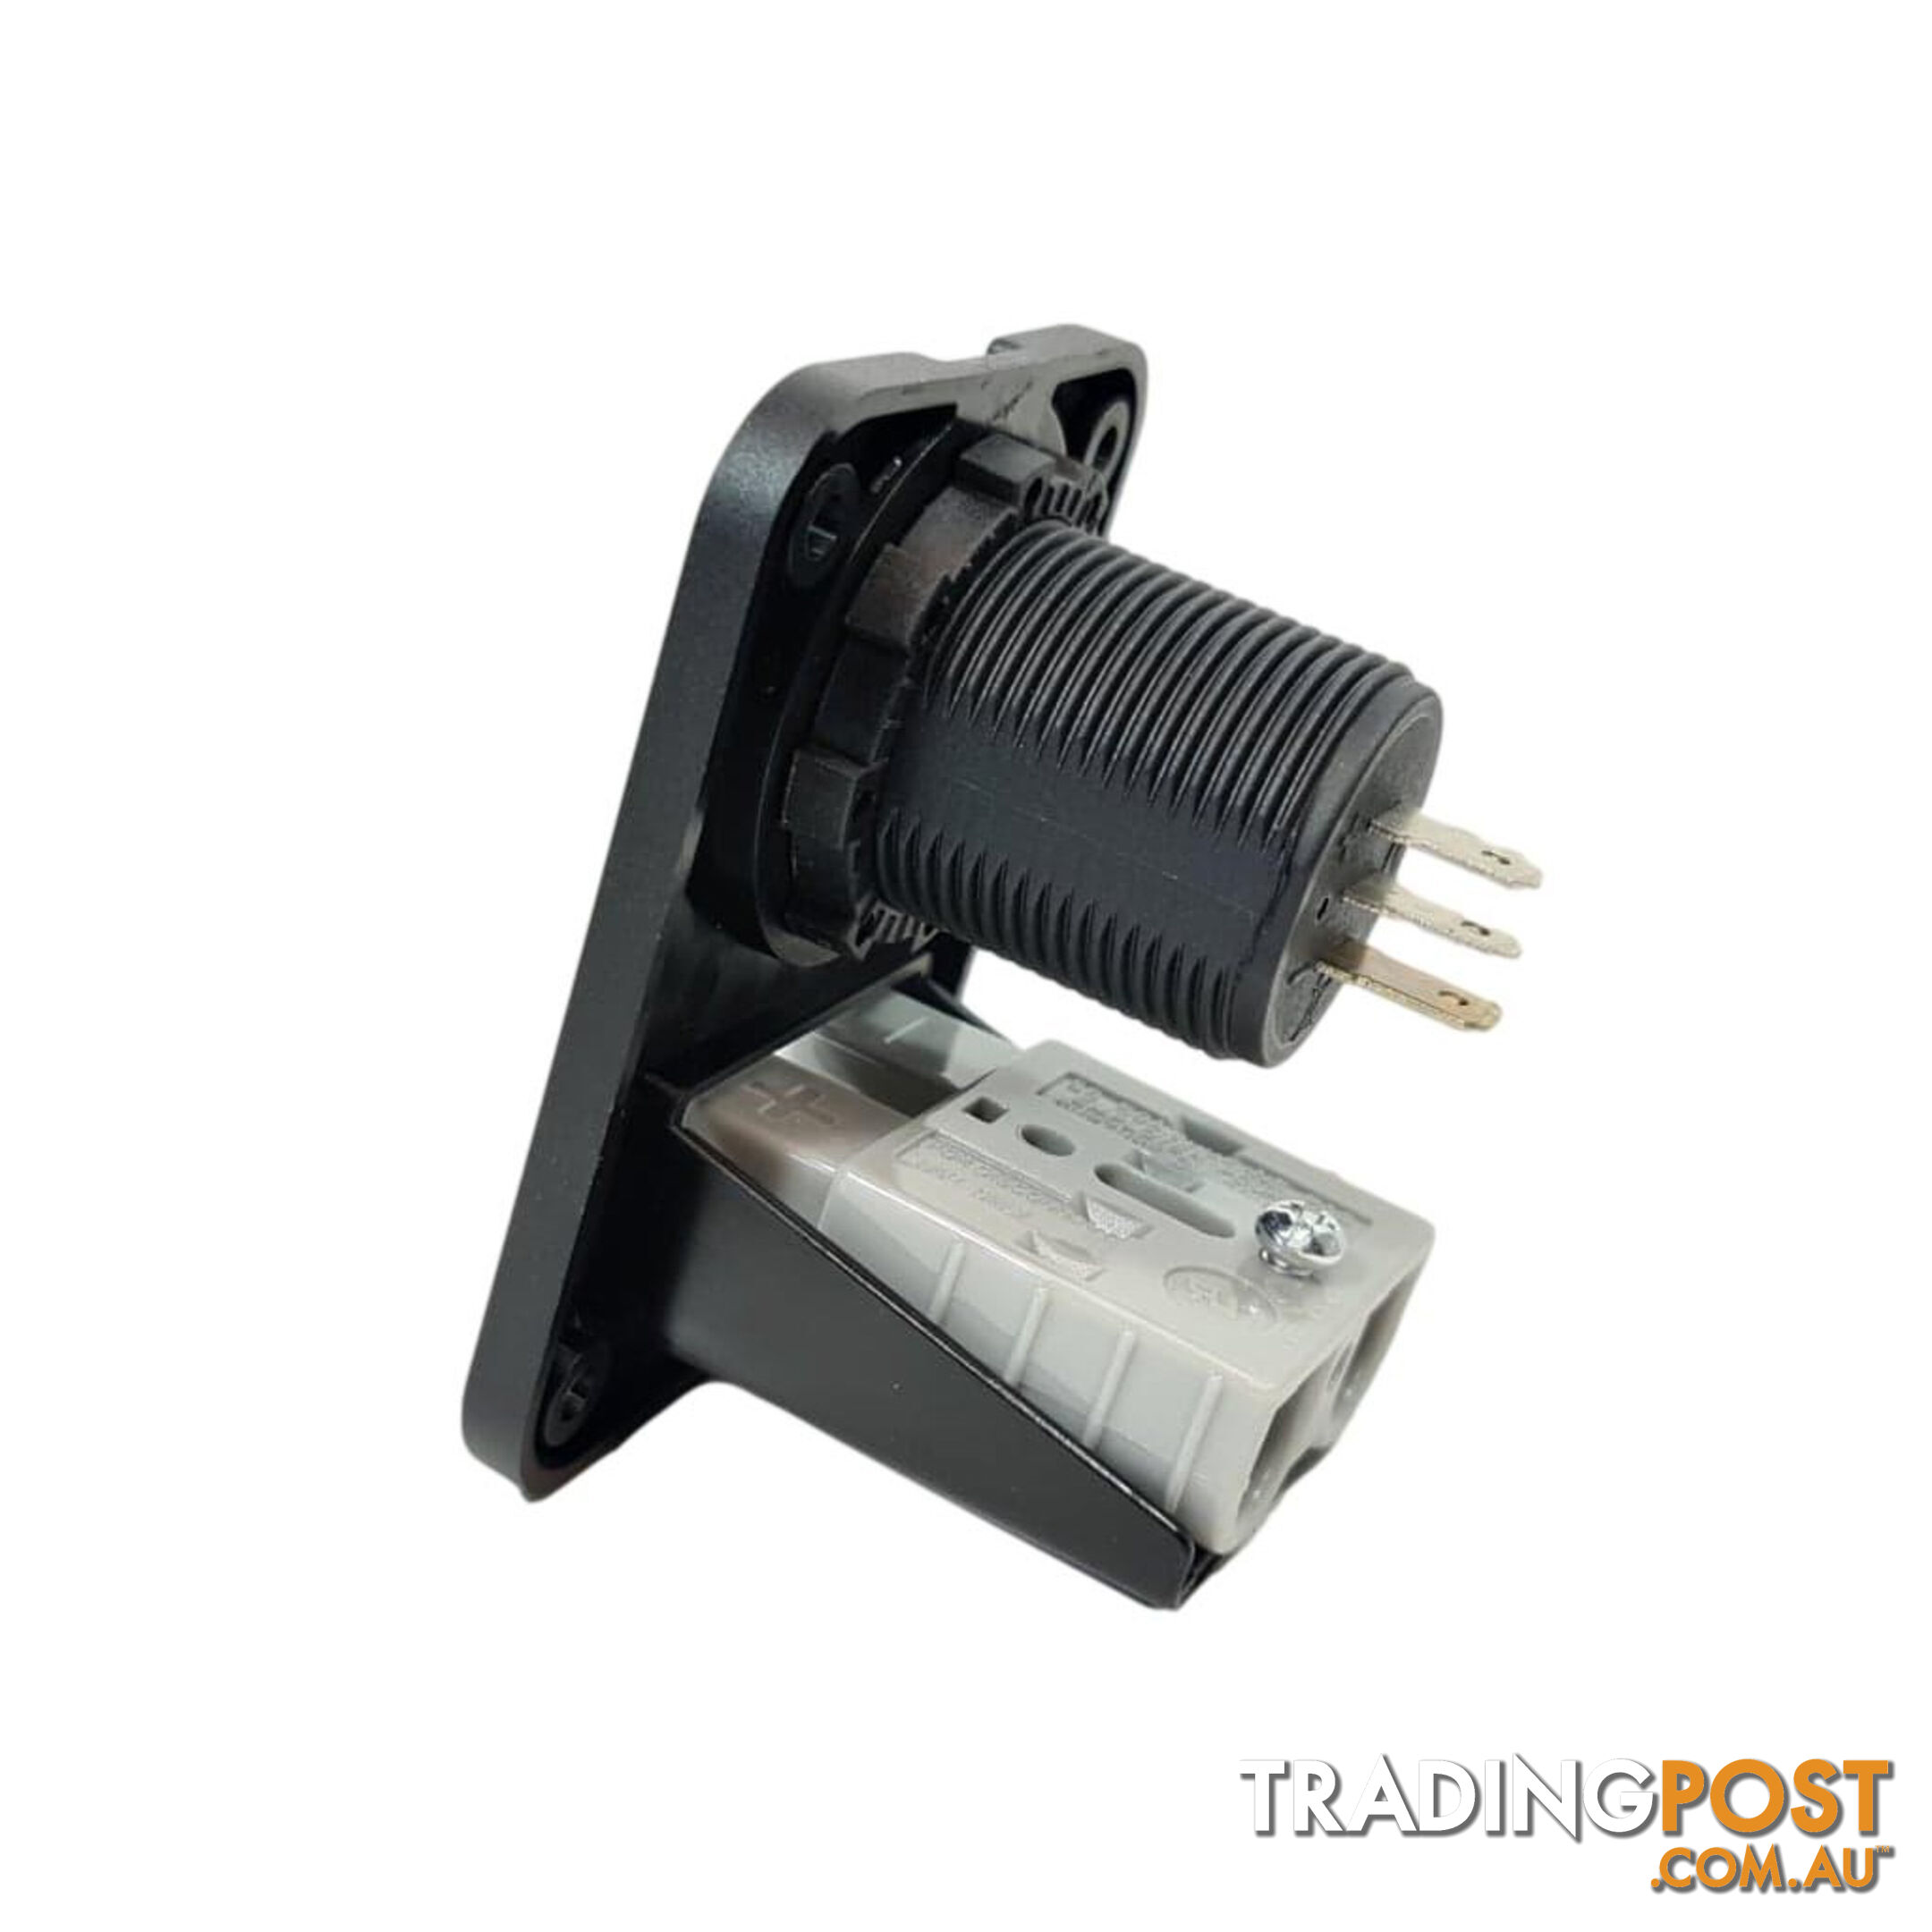 Panel Mount Assembly with 50 amp Anderson Plug and Dual Volt Meter SKU - AR0250aDualVolt